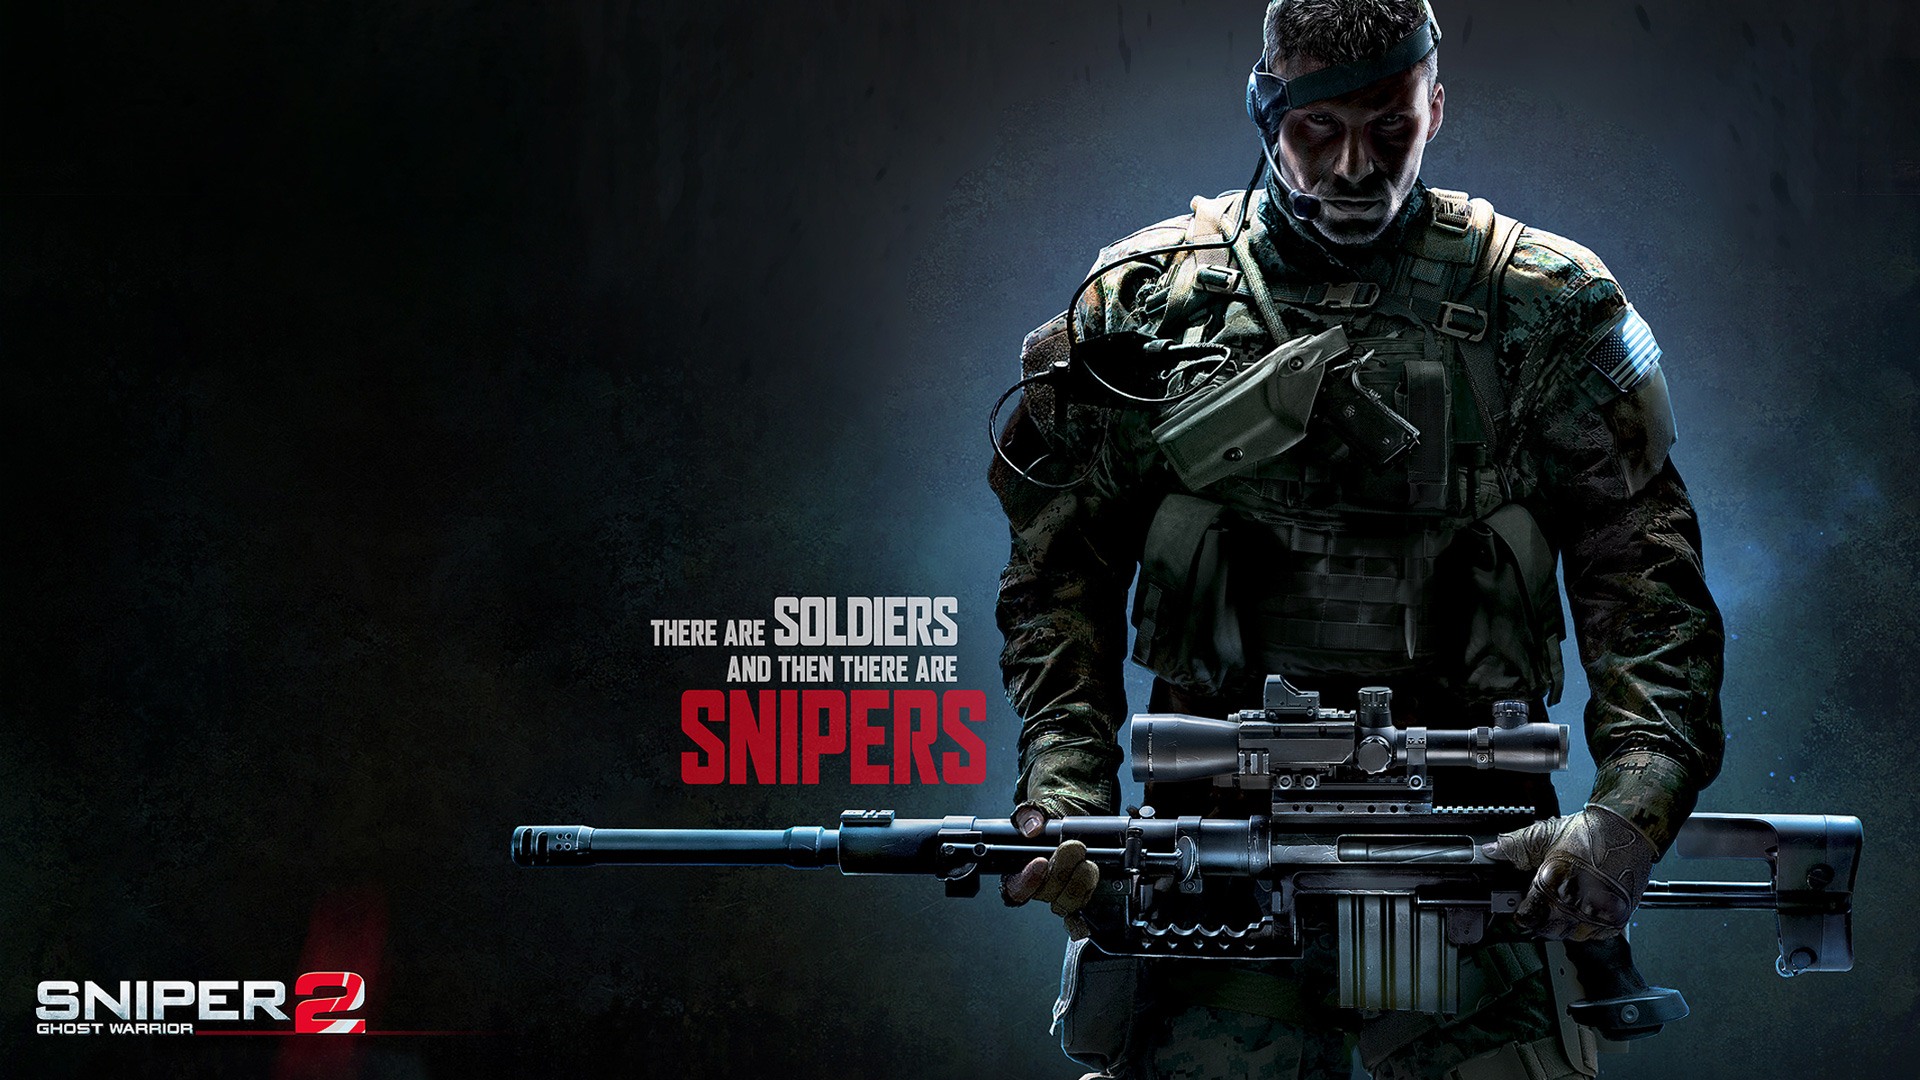 Ghost Warrior 2 Hd Wallpapers - Cole Anderson Sniper Ghost Warrior - HD Wallpaper 